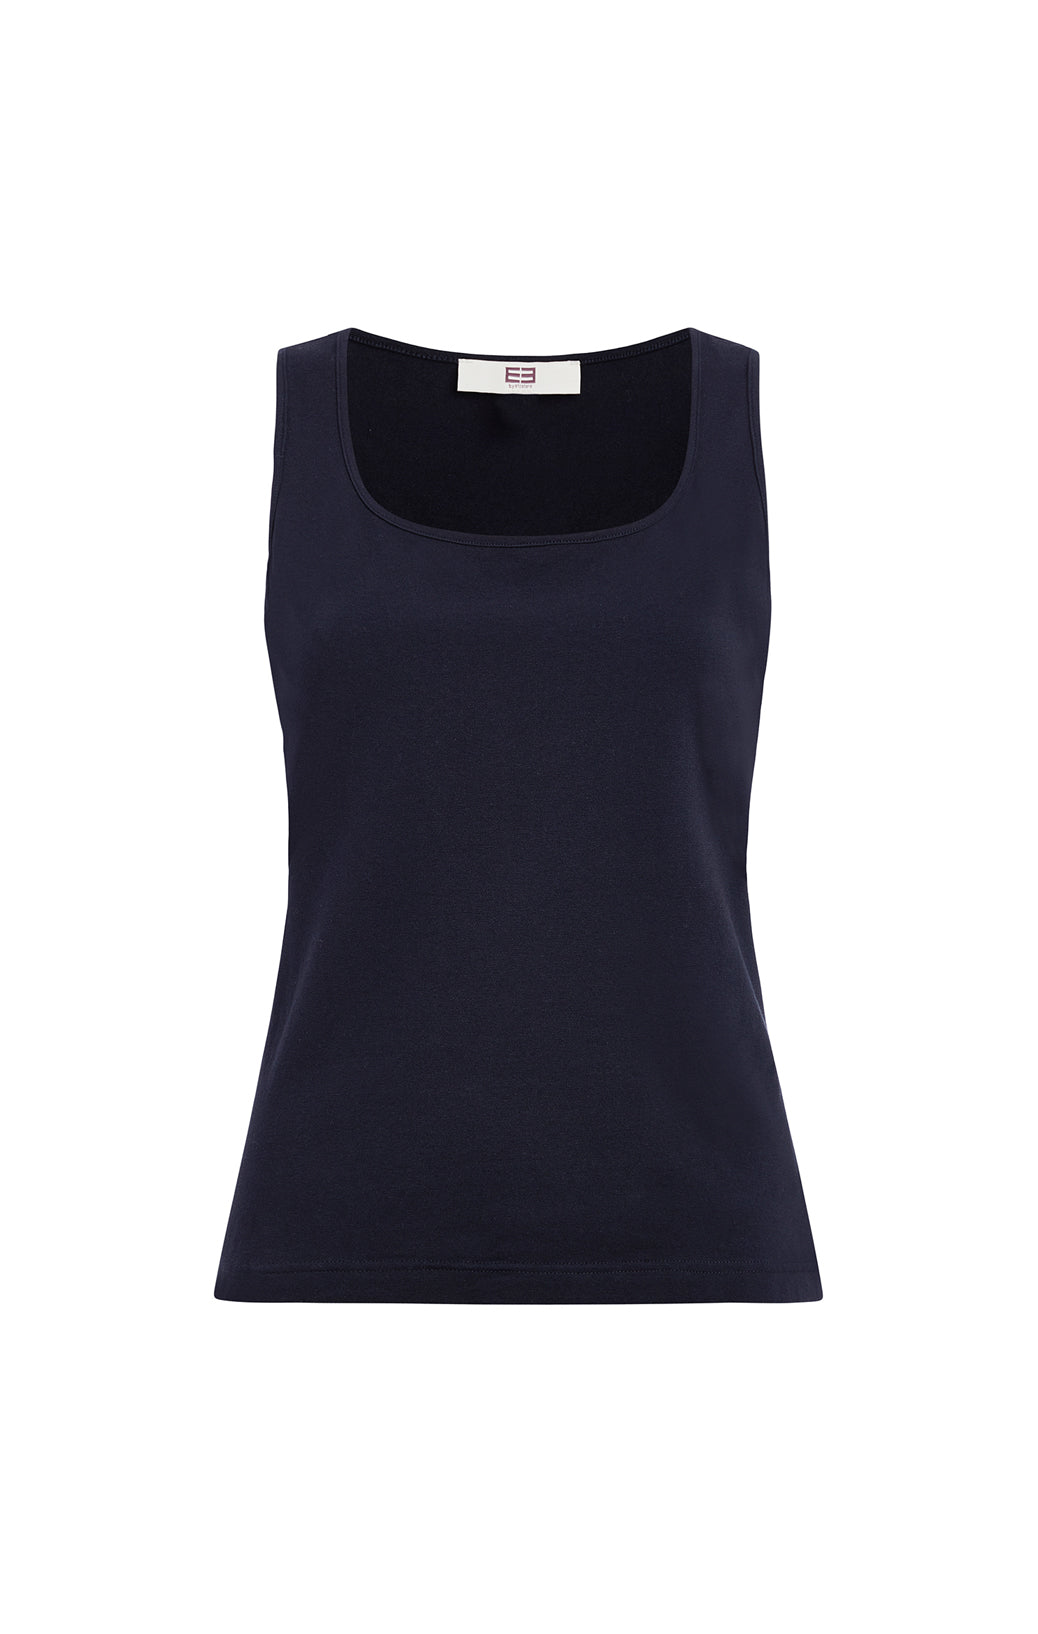 Laguna-Blk - Stretch Jersey Tank Top With Portrait Neck - Product Image